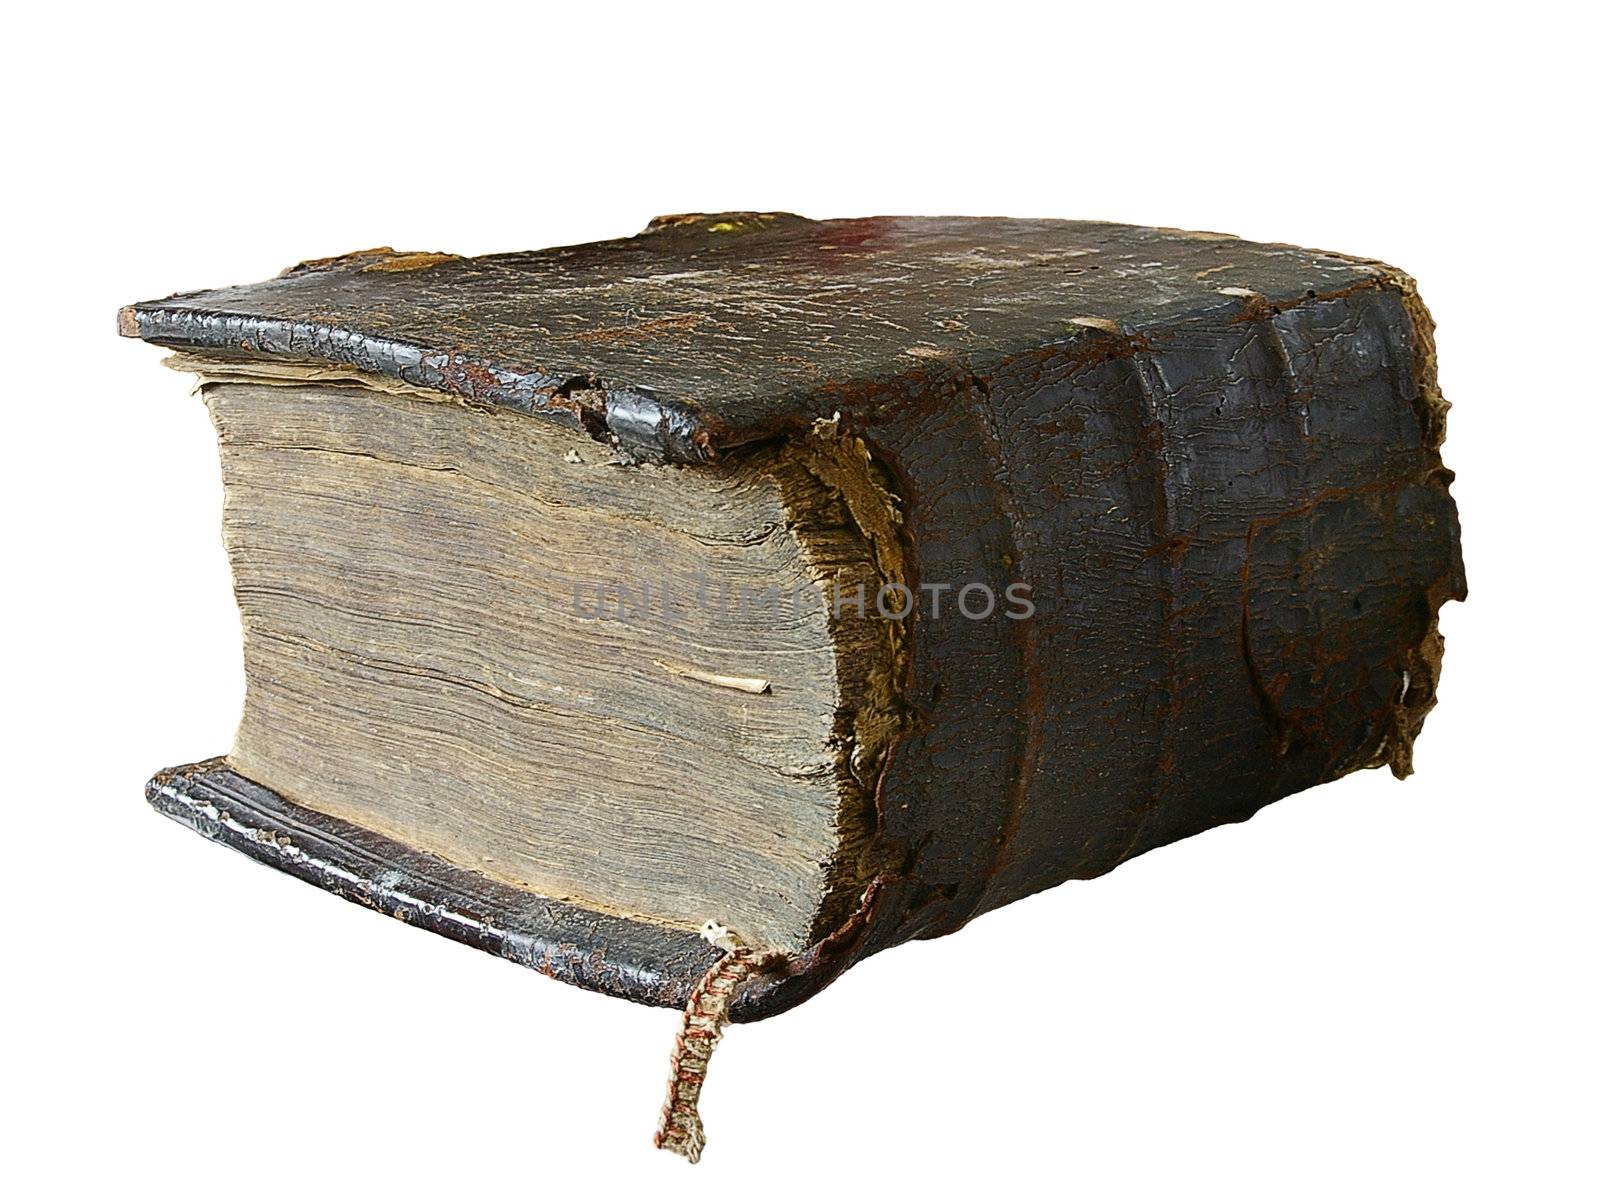 The ancient book in leather reliure on a light background